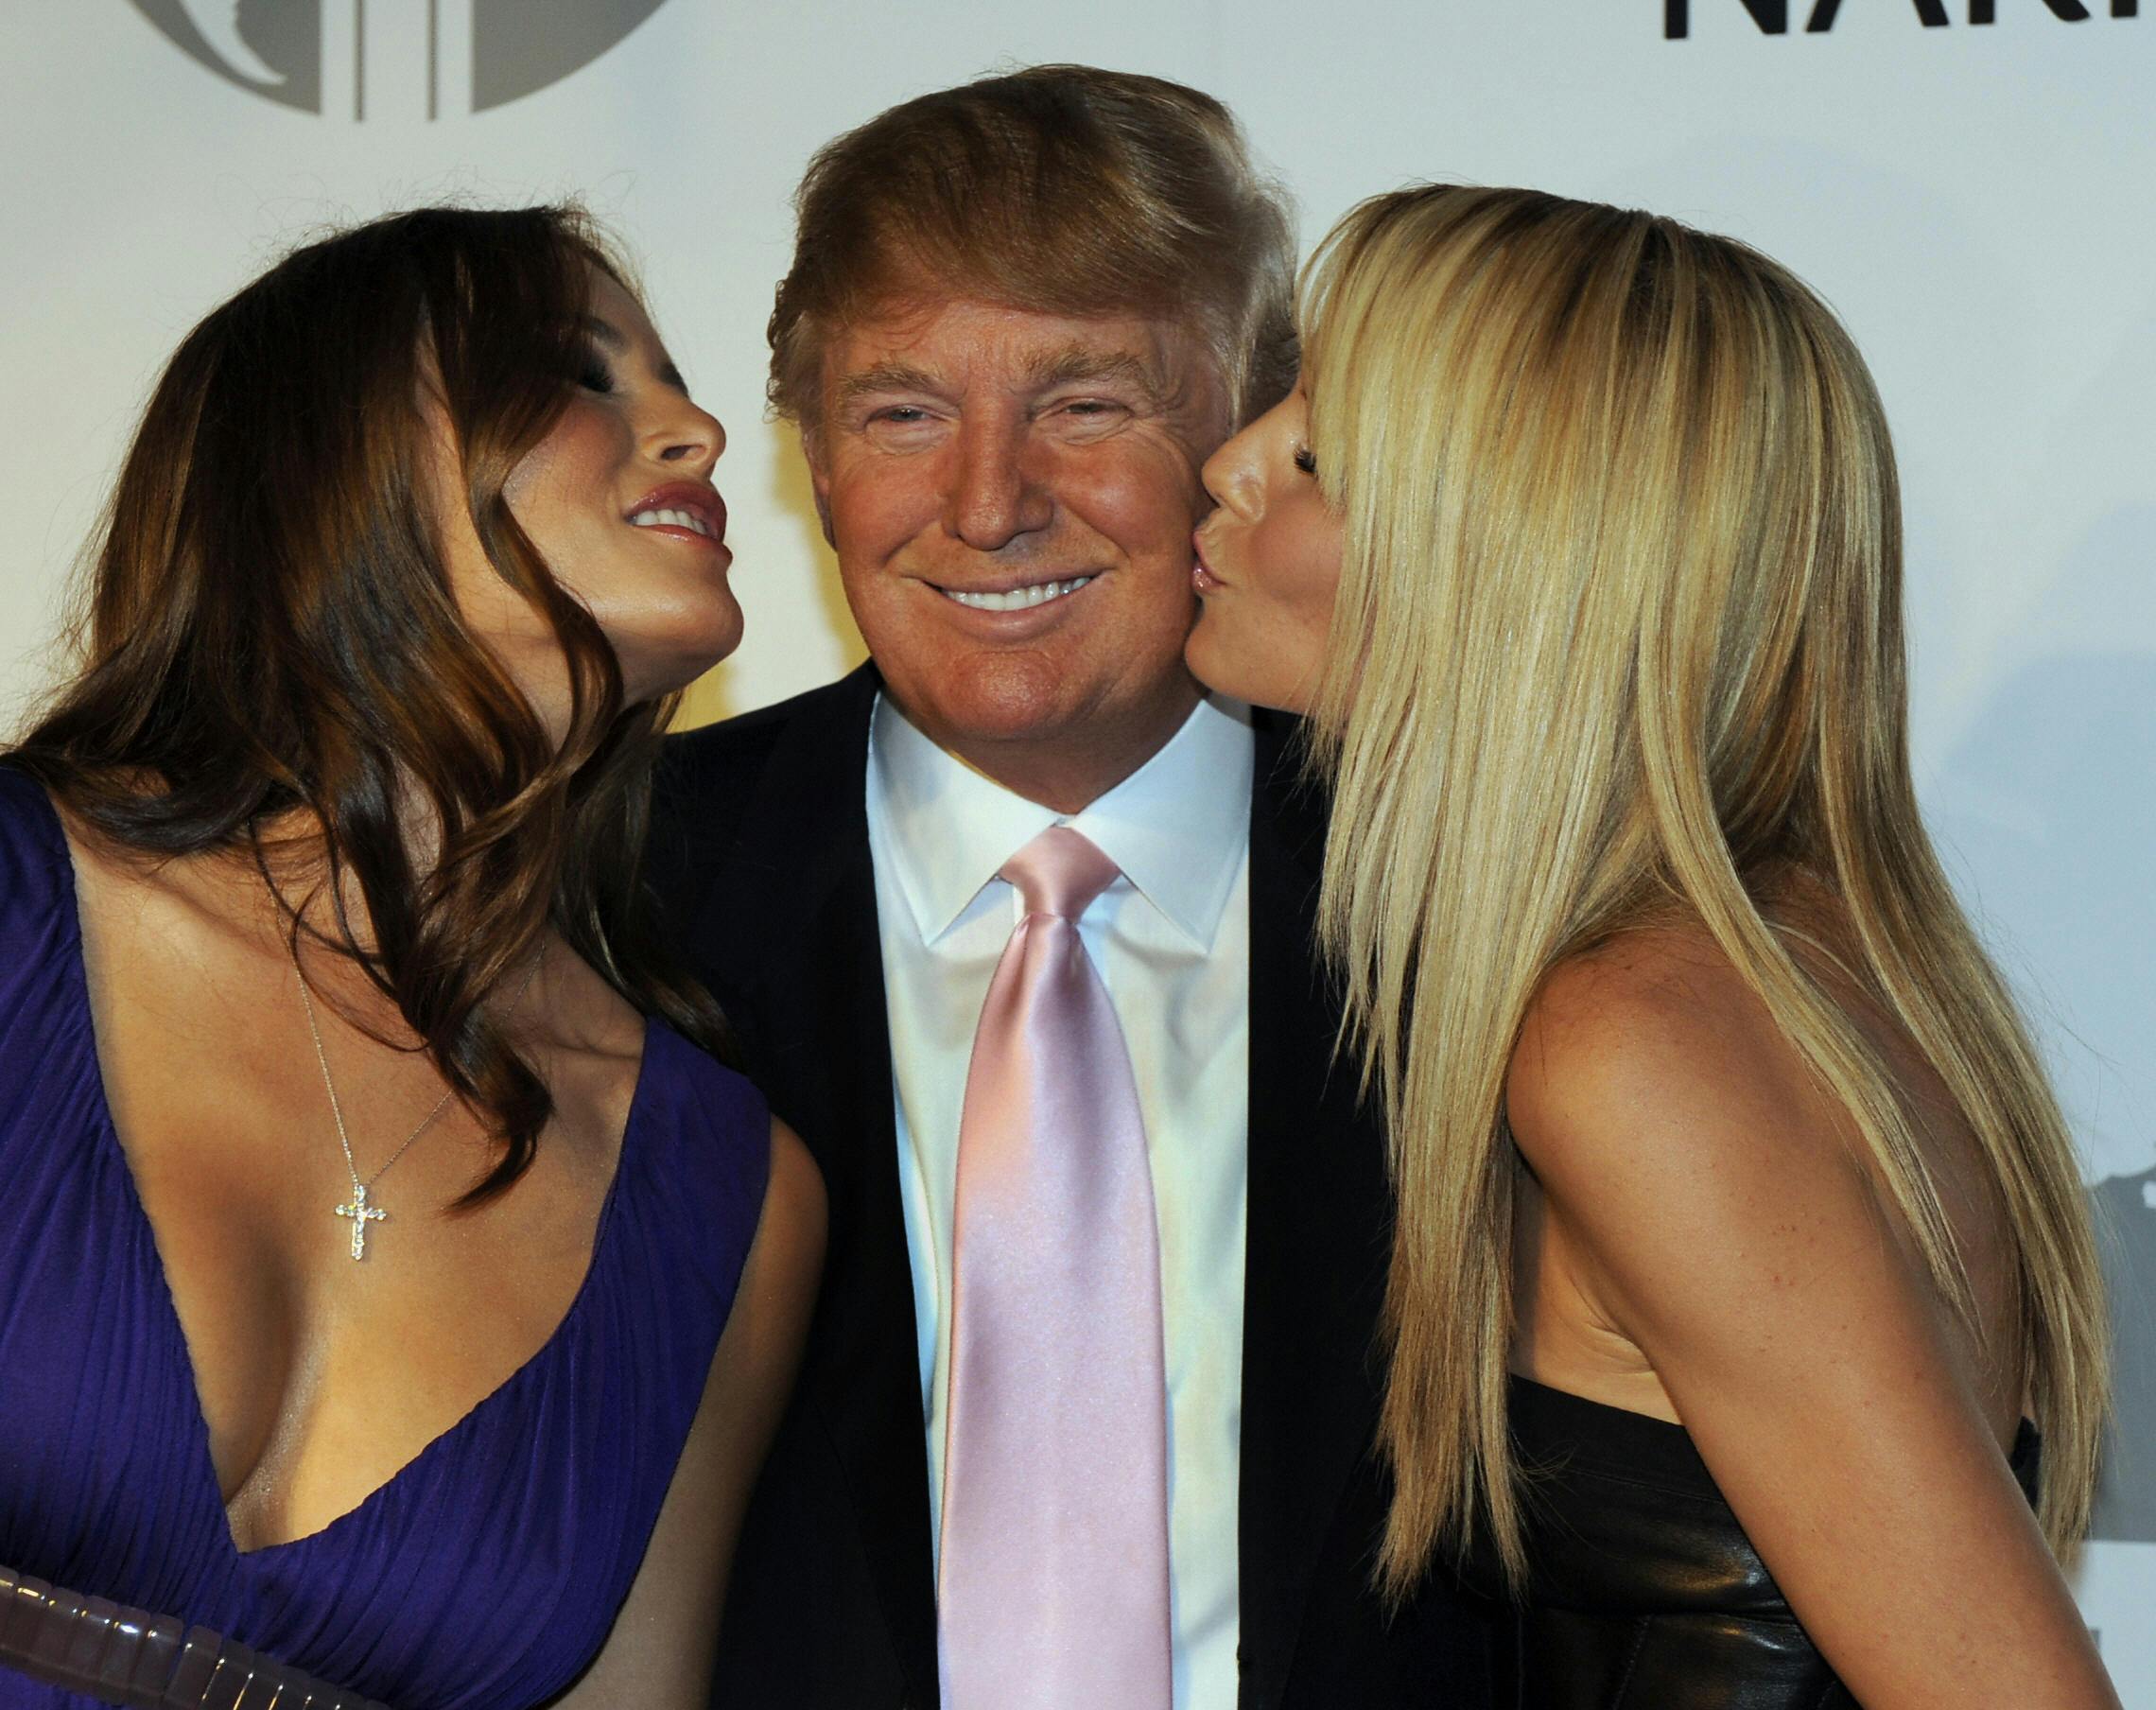 Donald Trump's way of hitting on women is to “grab them by the p**sy.” |  The New Republic